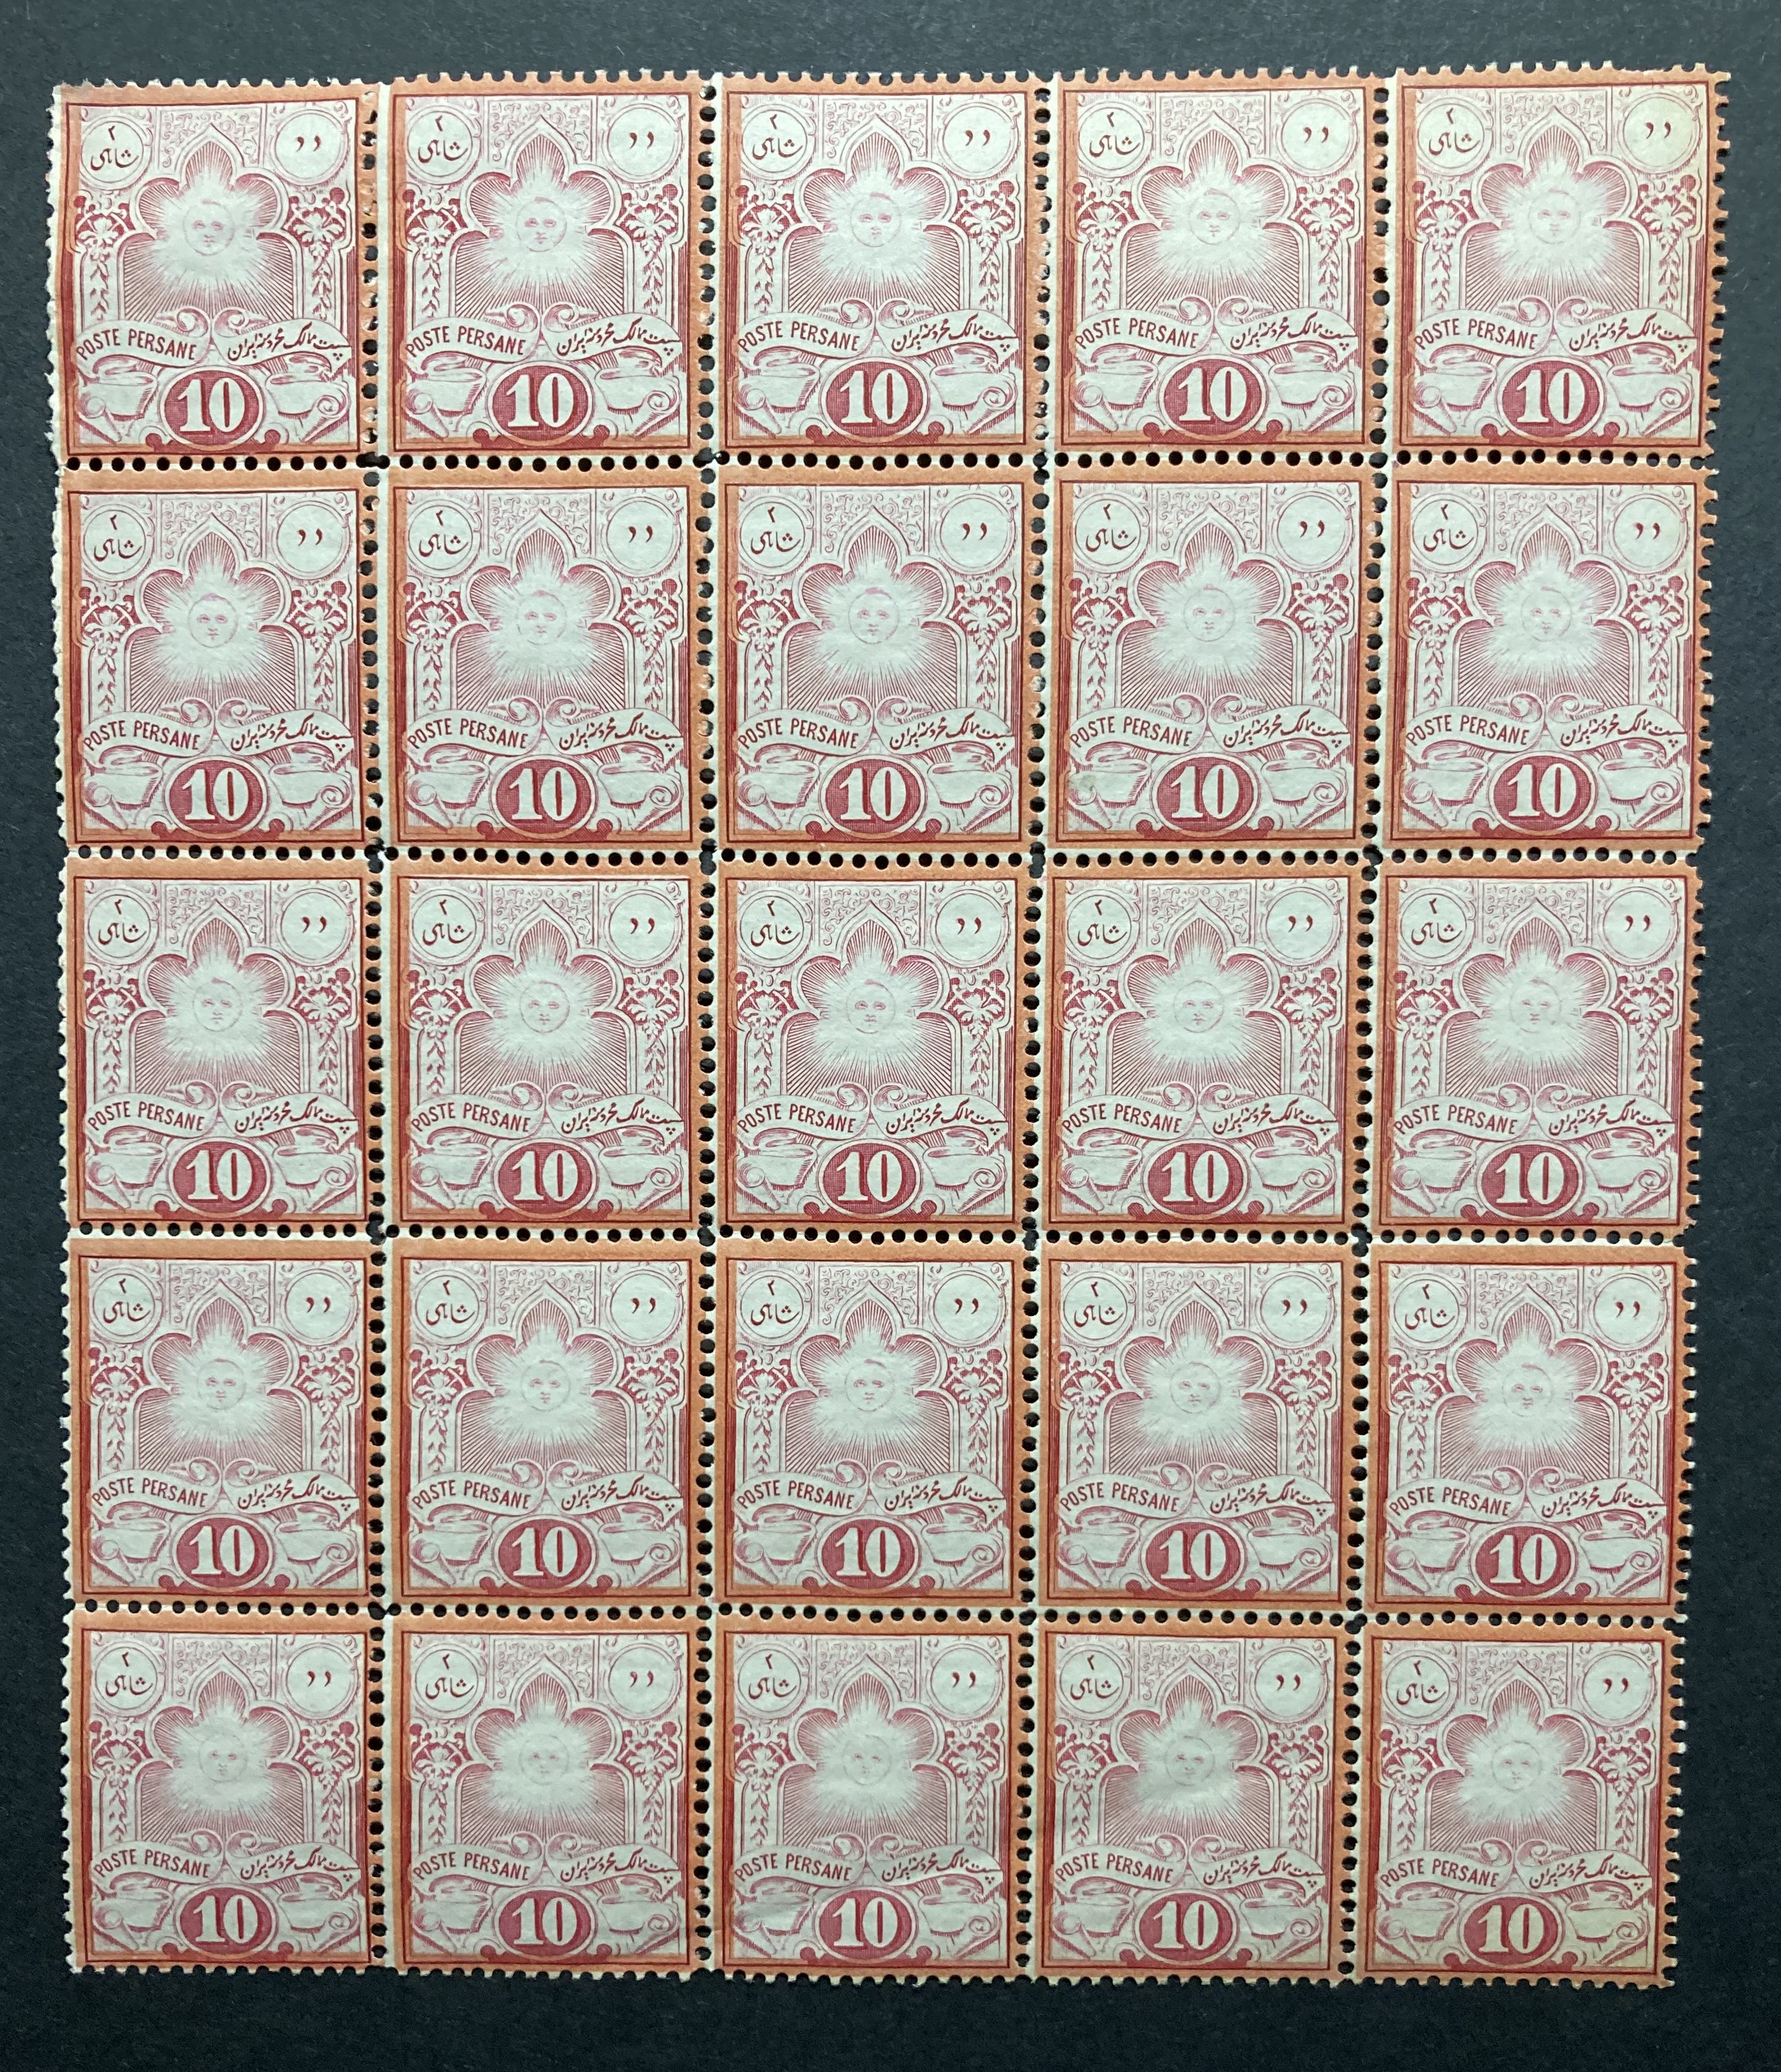 Persian stamps: 1882 Vienna recess definitive printing of 10c carmine and deep pink. - Image 3 of 3